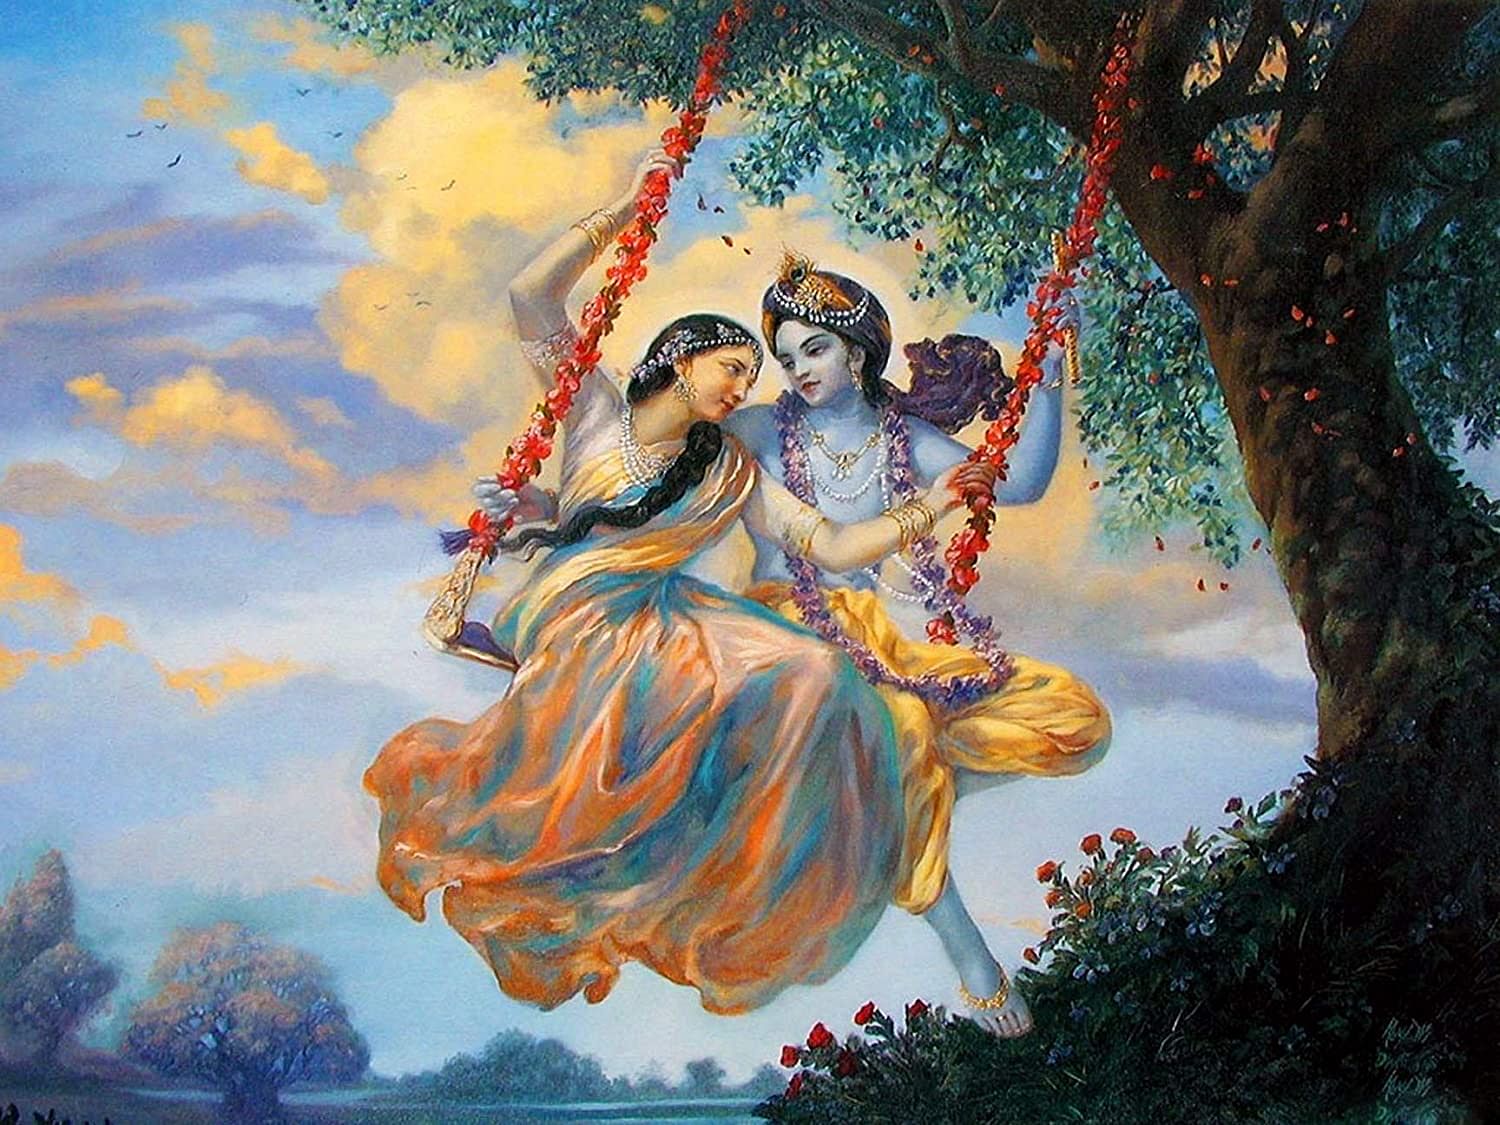 Five interesting facts about relationship of Radha and Krishna